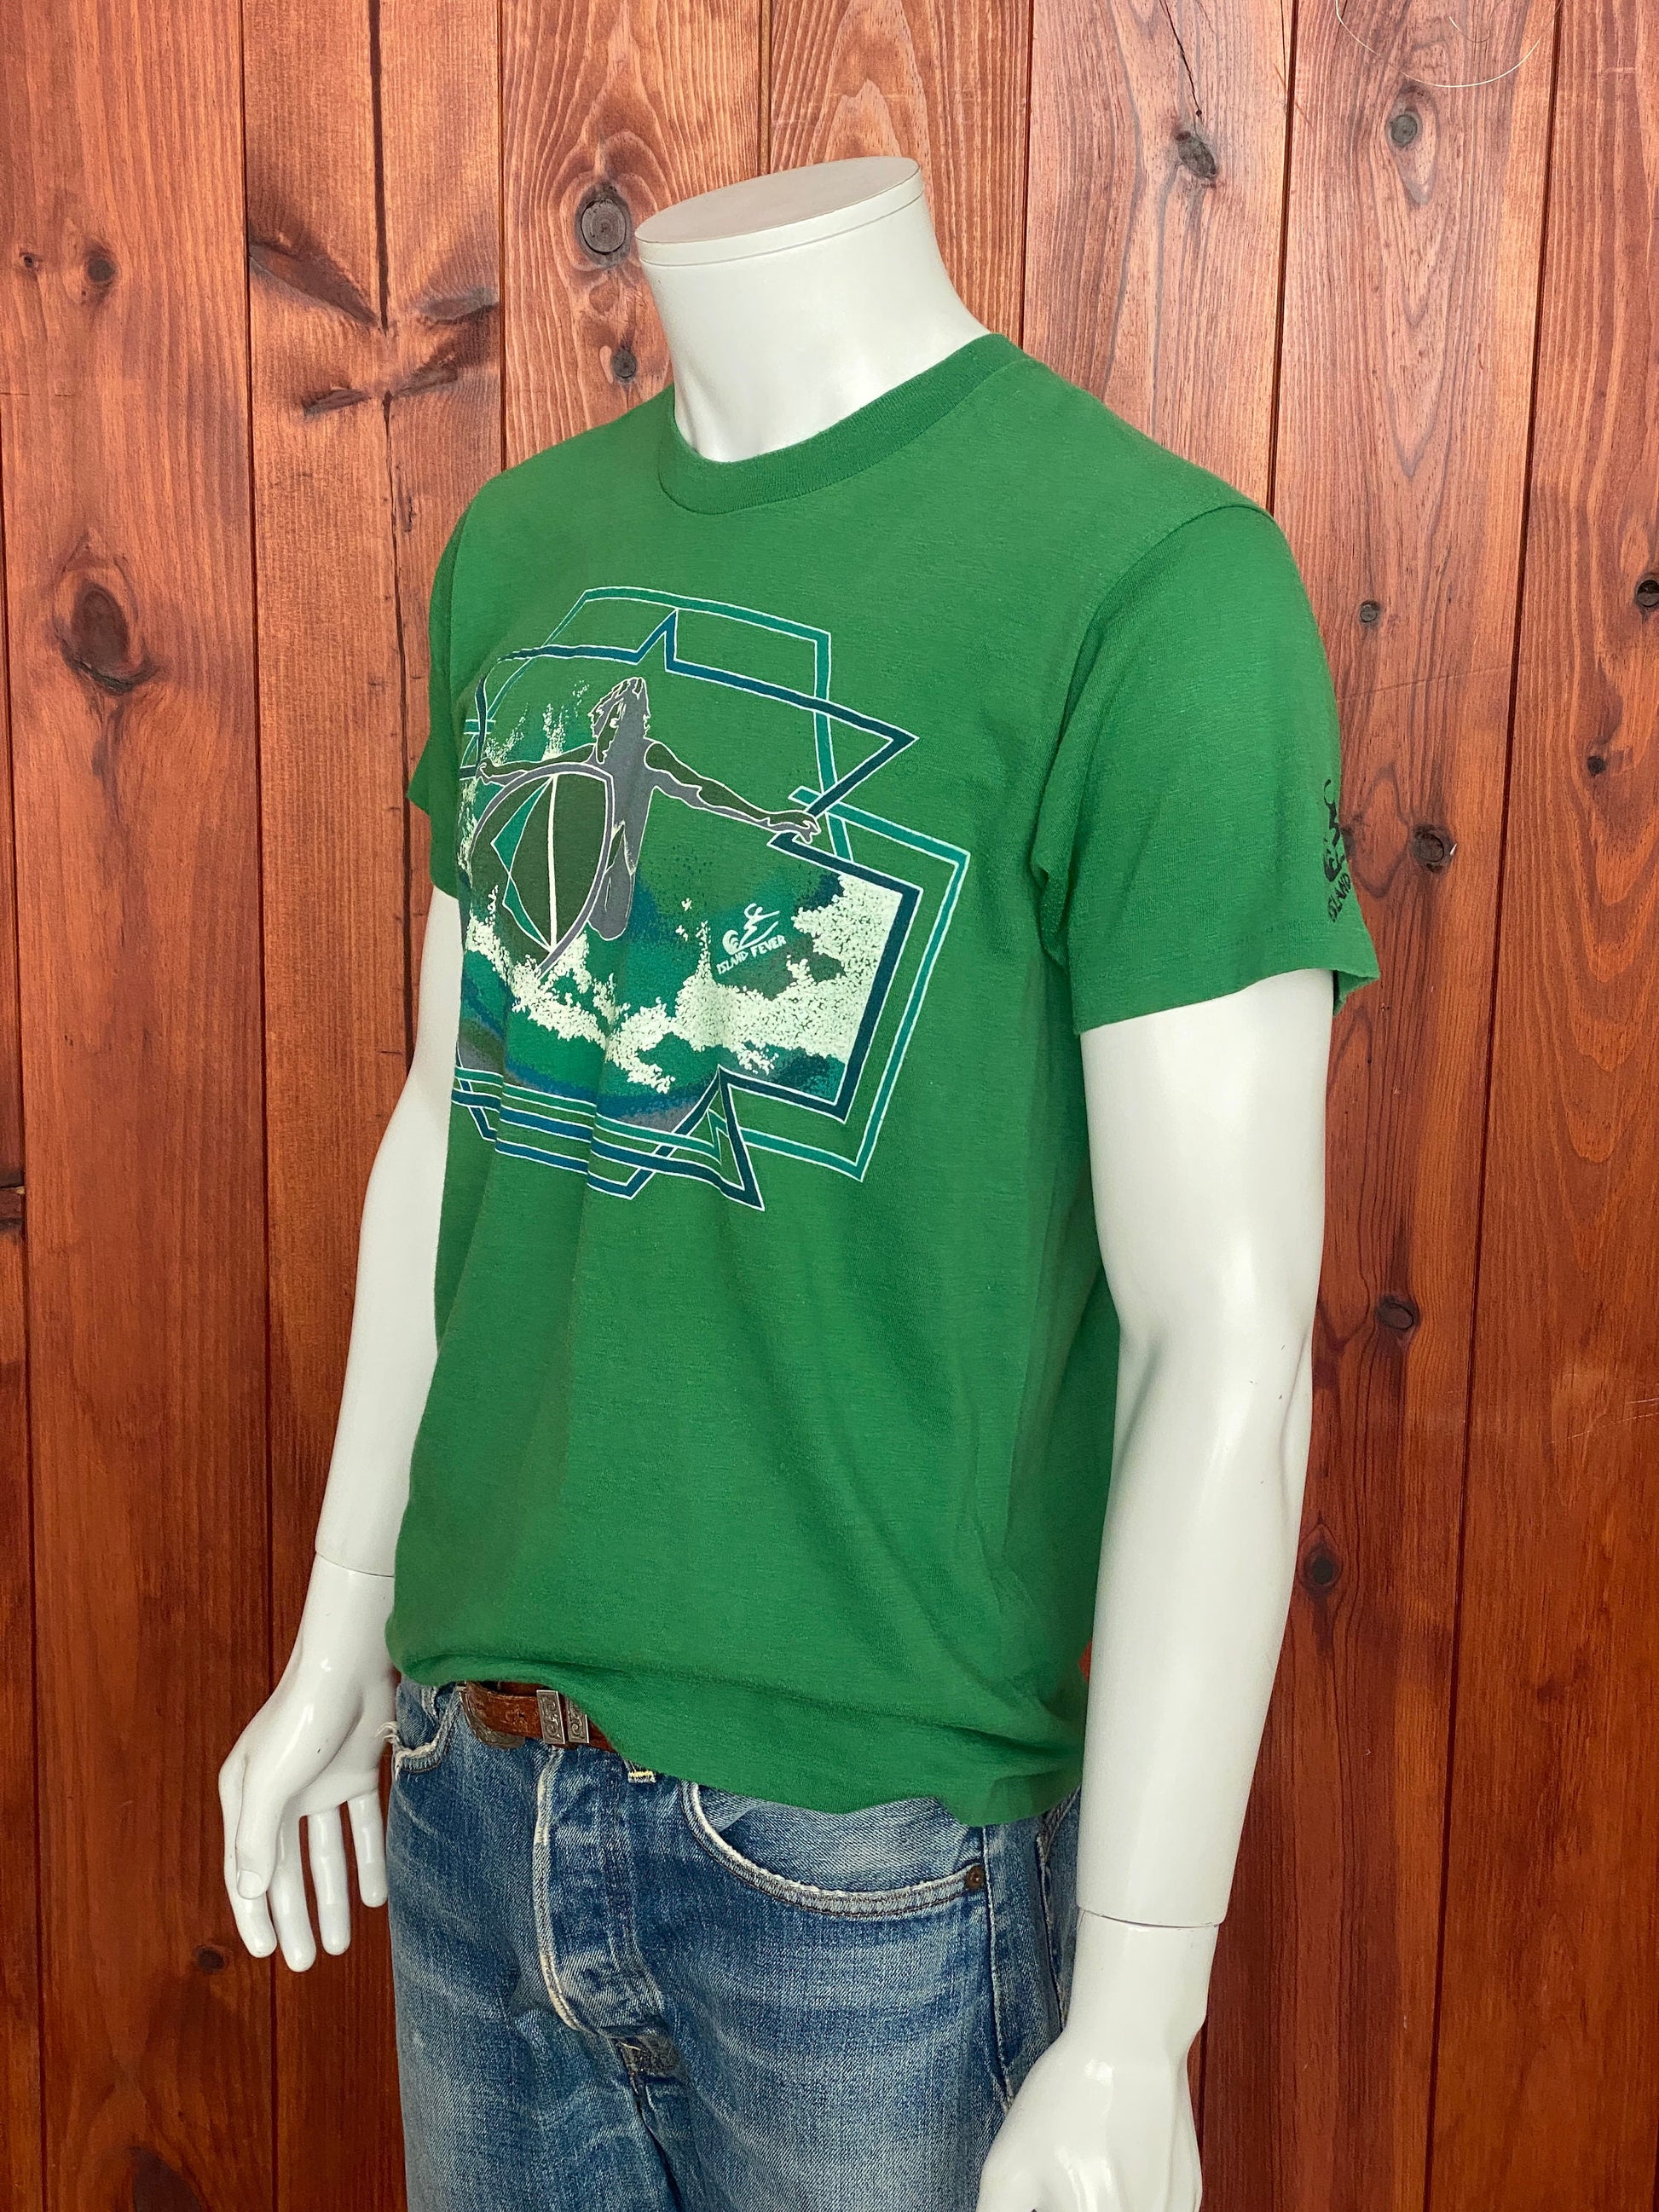 Large Authentic 50/50 Vintage 90s T-shirt Made In USA | Classic Retro Apparel